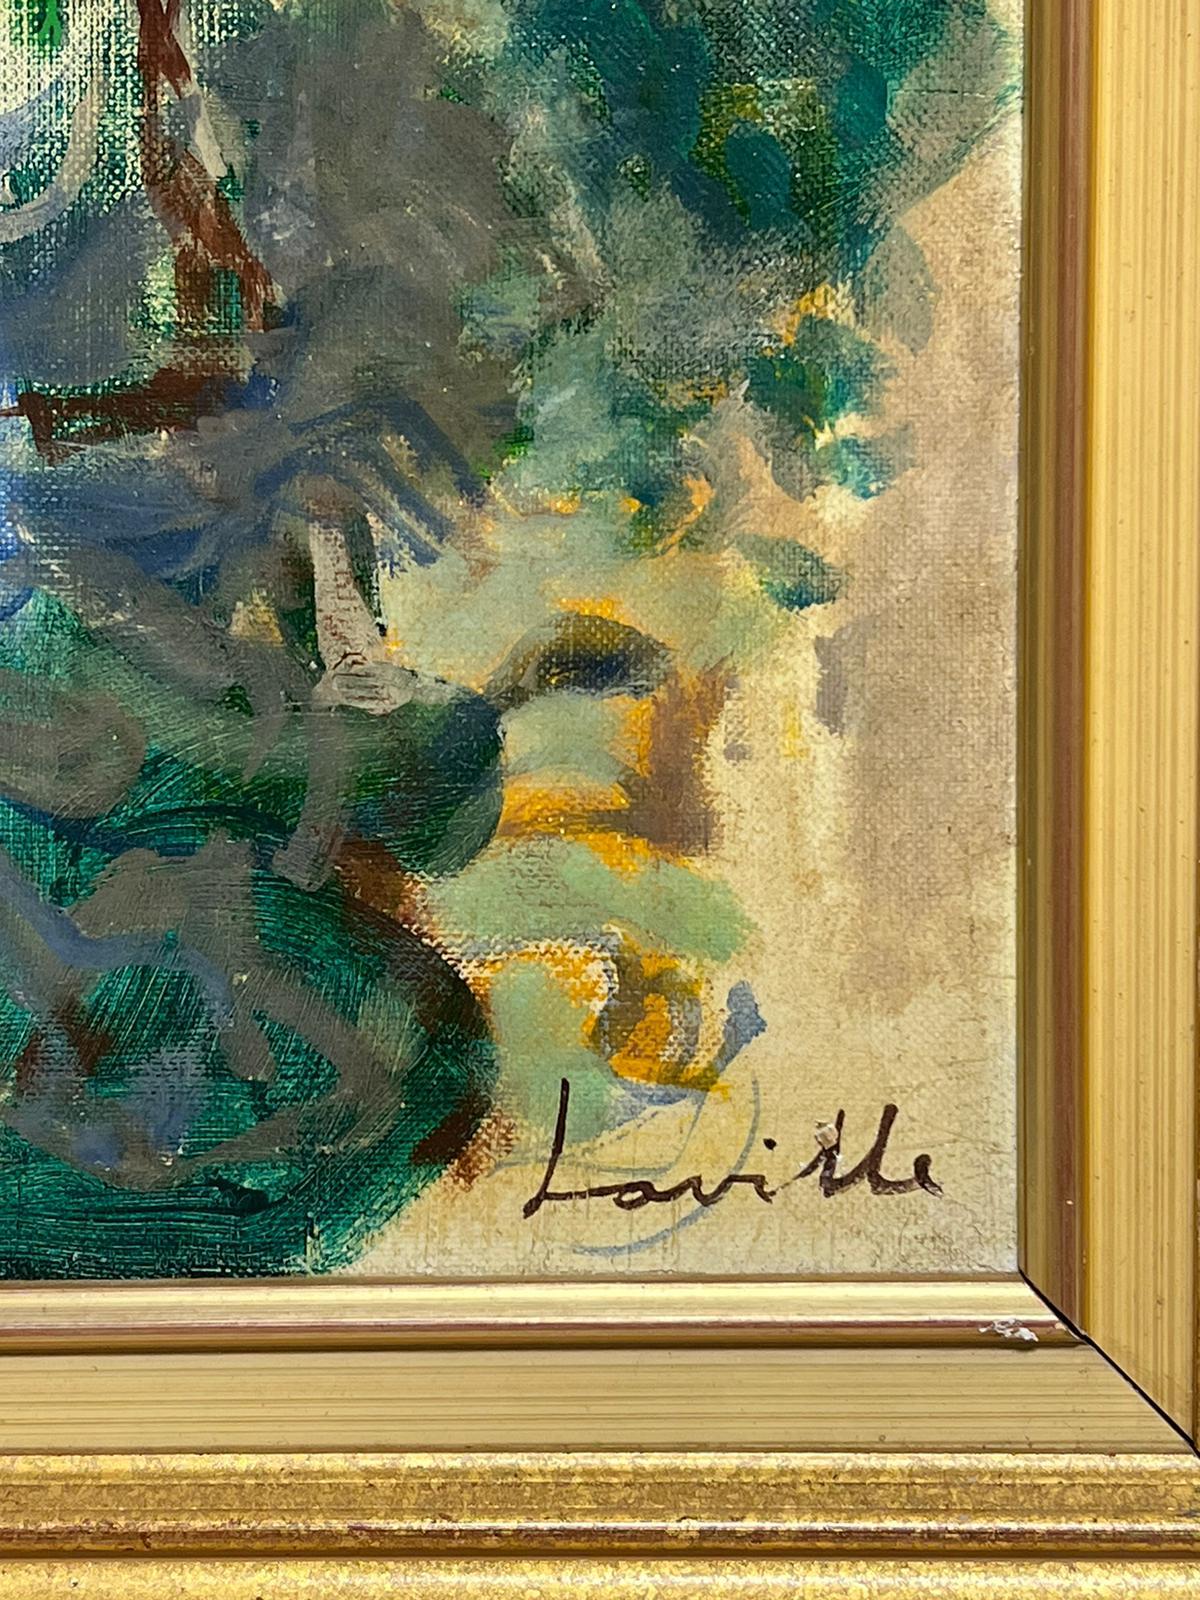 Henri Laville (1916)
'La femme en bleu', cira 1960's
signed oil on canvas, framed 
framed: 20.5 x 15 inches
canvas: 16 x 11 inches
provenance: private collection, France
condition: very good and sound condition